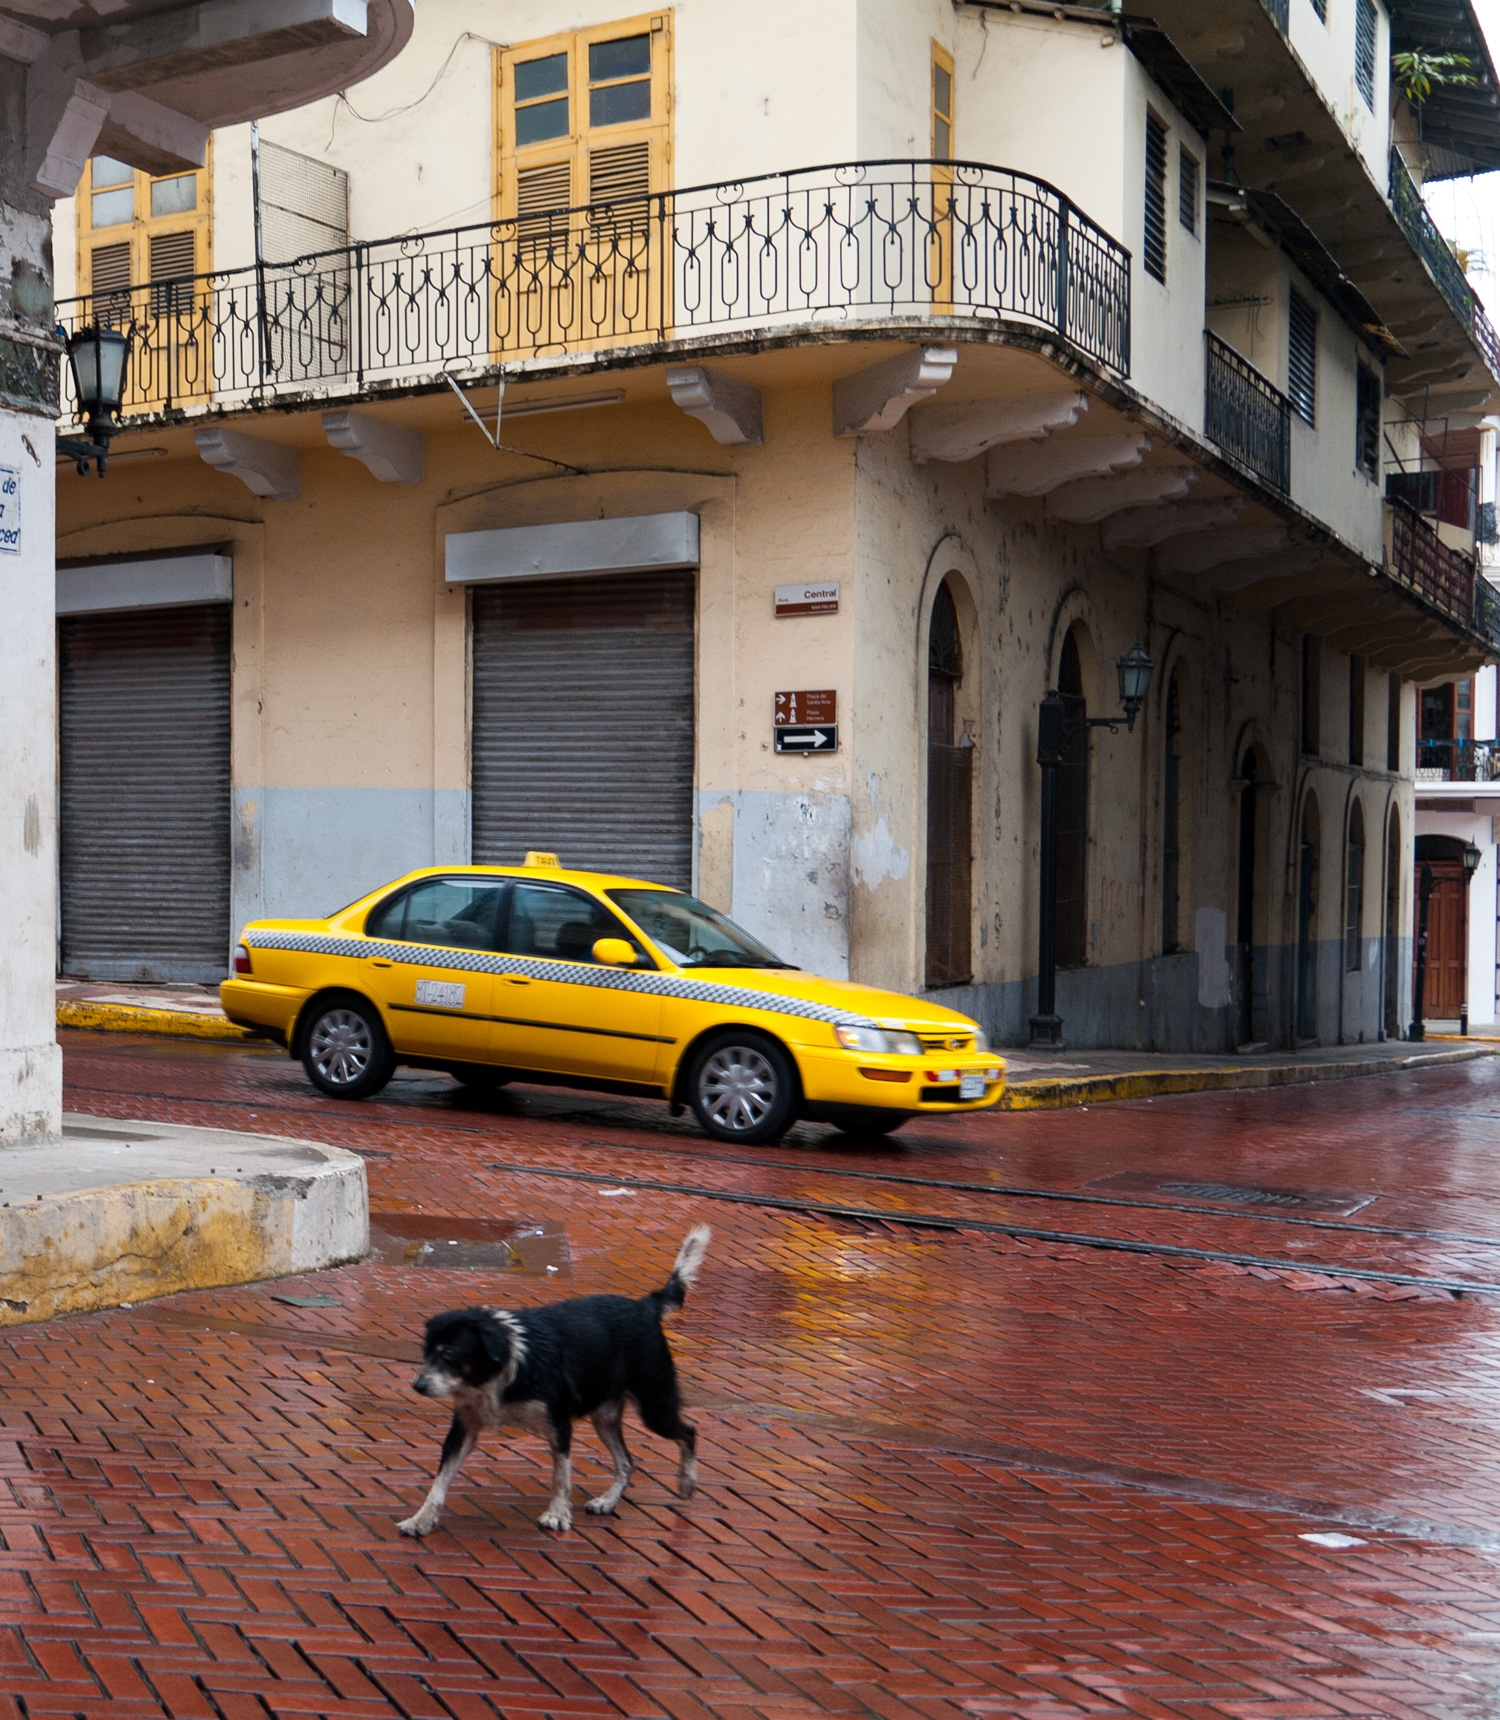 A Dog, A Taxi And A Very Wet Day